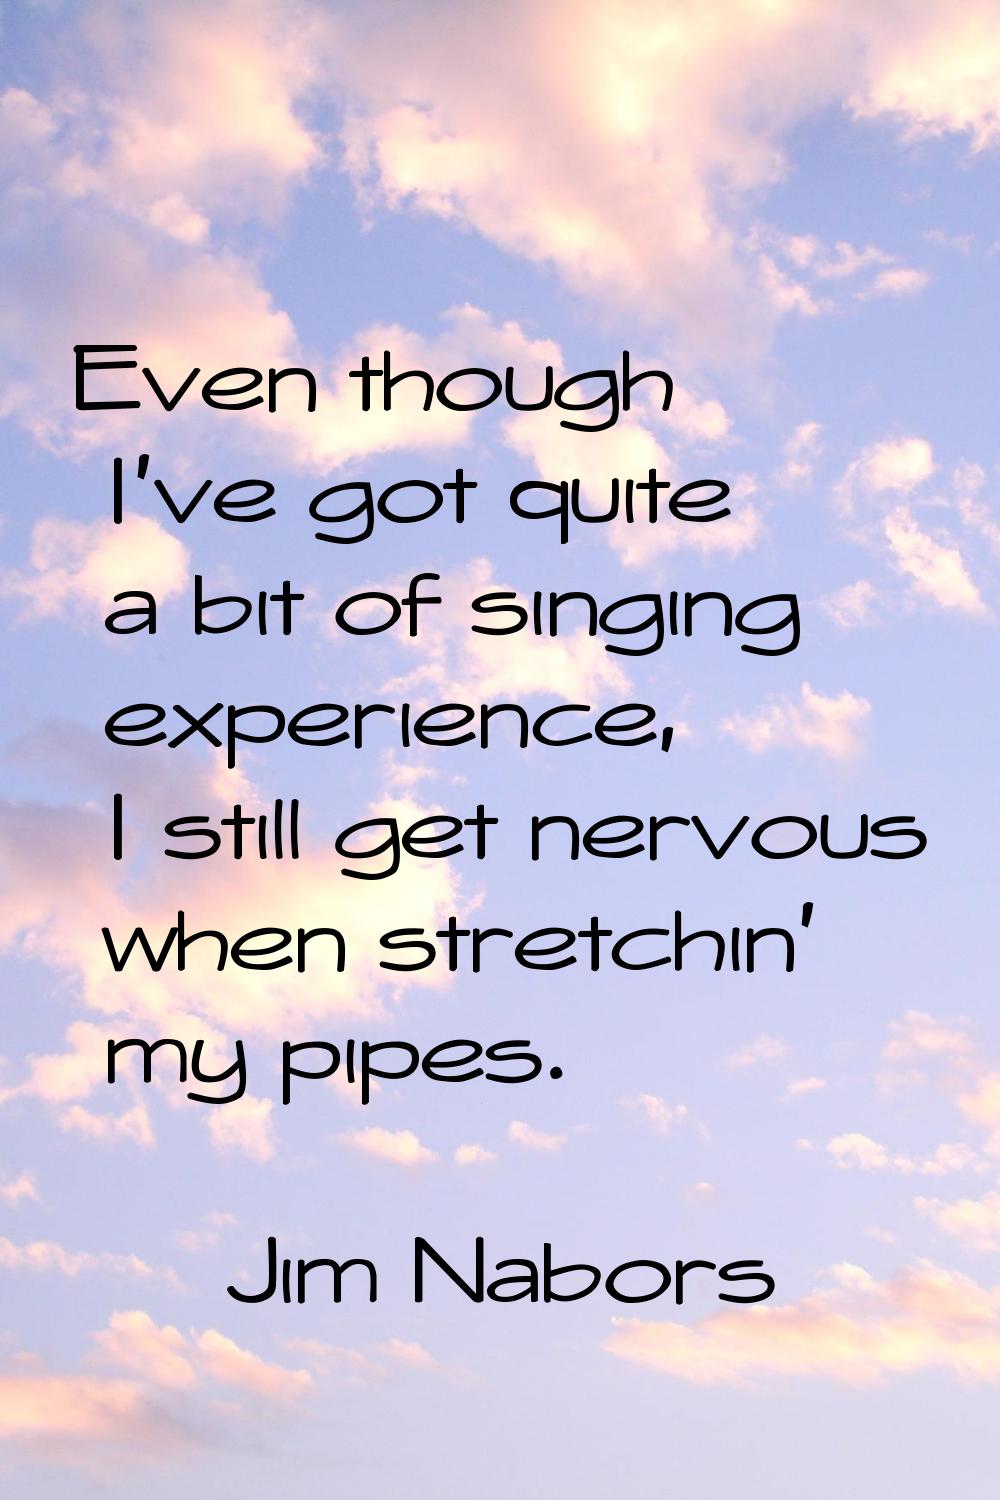 Even though I've got quite a bit of singing experience, I still get nervous when stretchin' my pipe